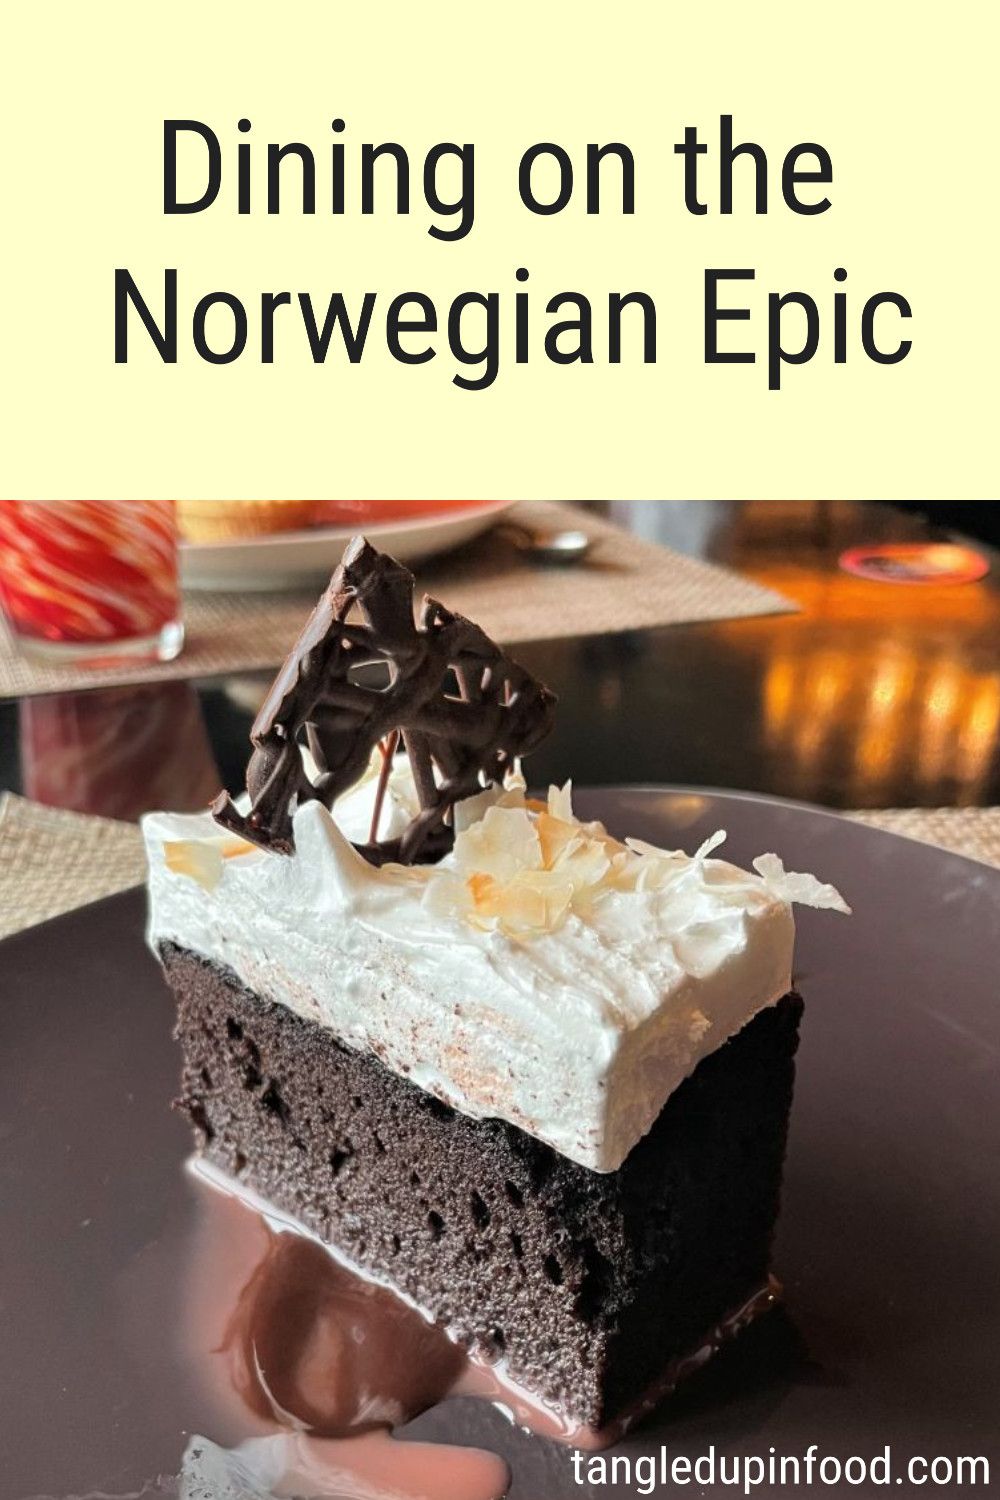 Piece of chocolate cake with text reading "Dining on the Norwegian Epic"